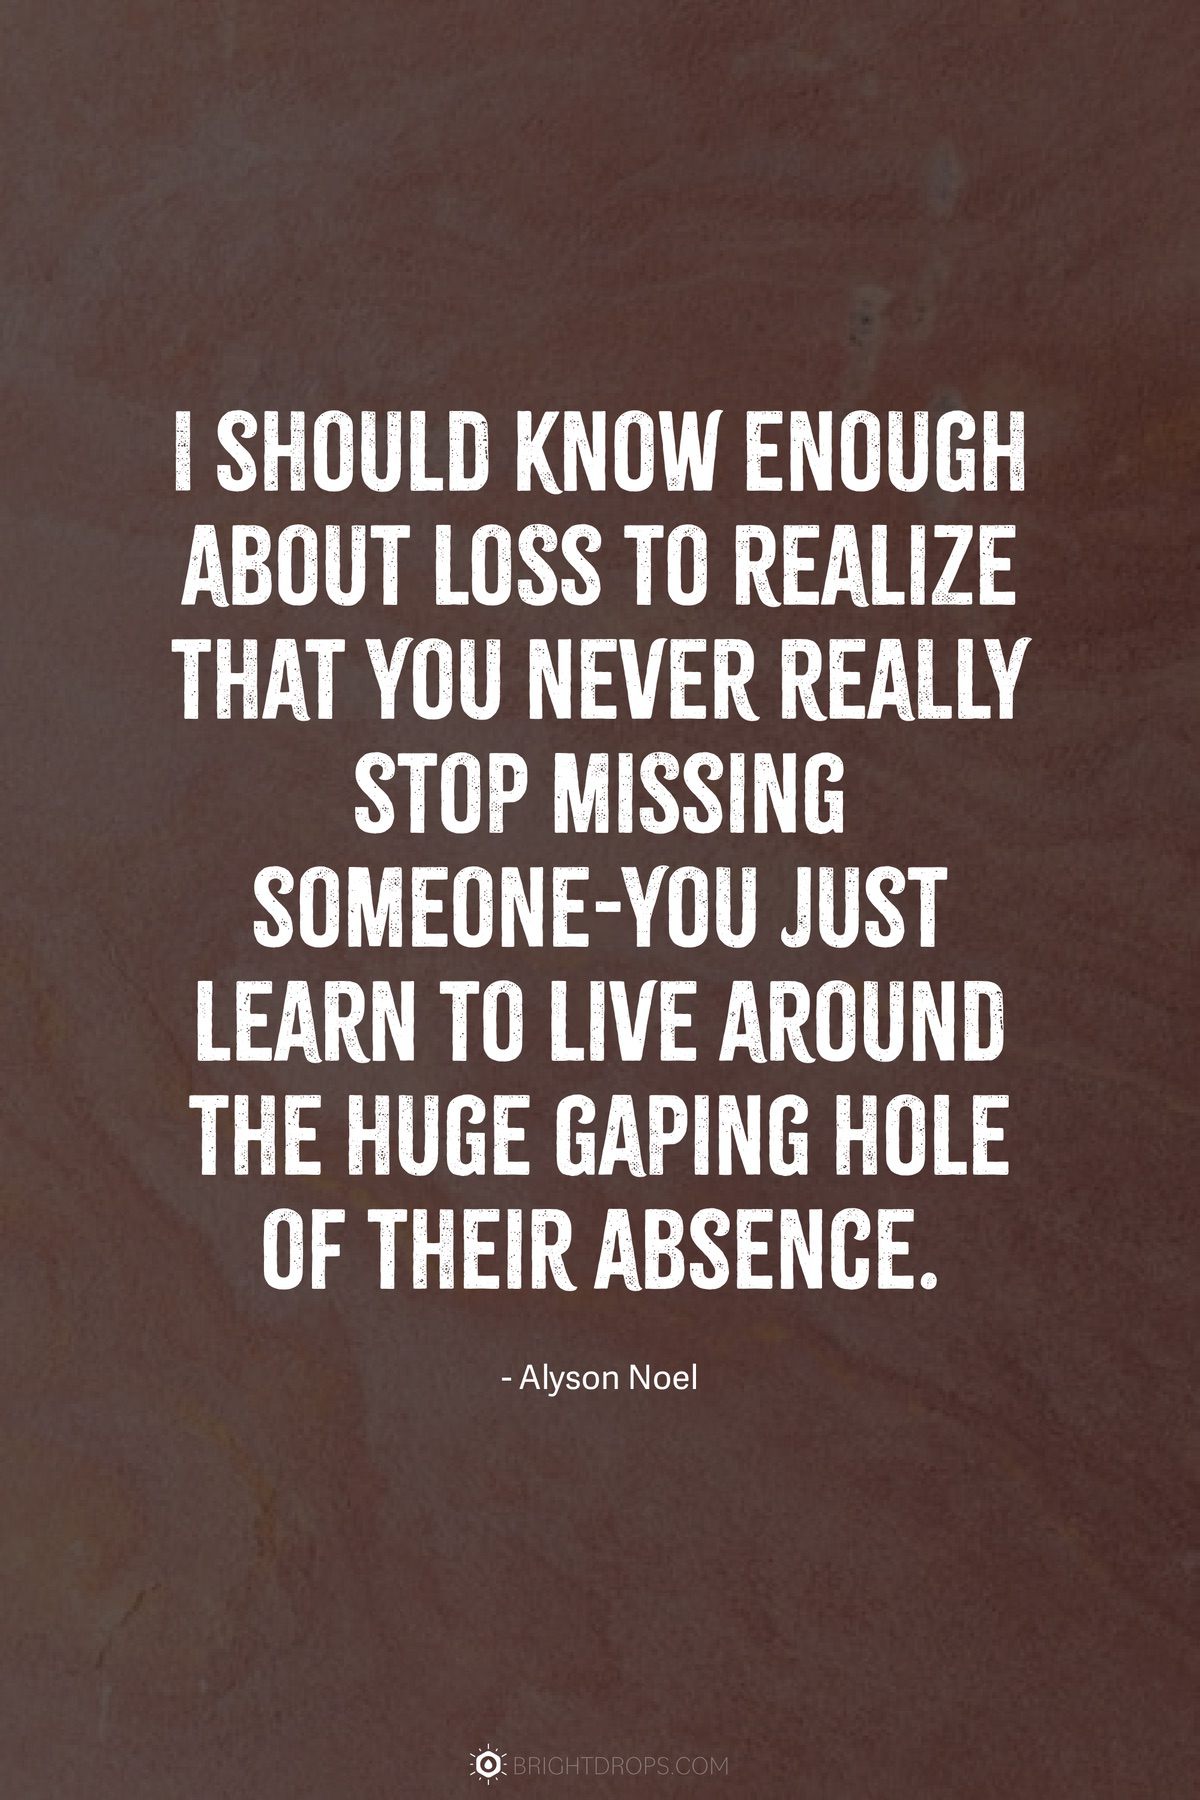 I should know enough about loss to realize that you never really stop missing someone-you just learn to live around the huge gaping hole of their absence.